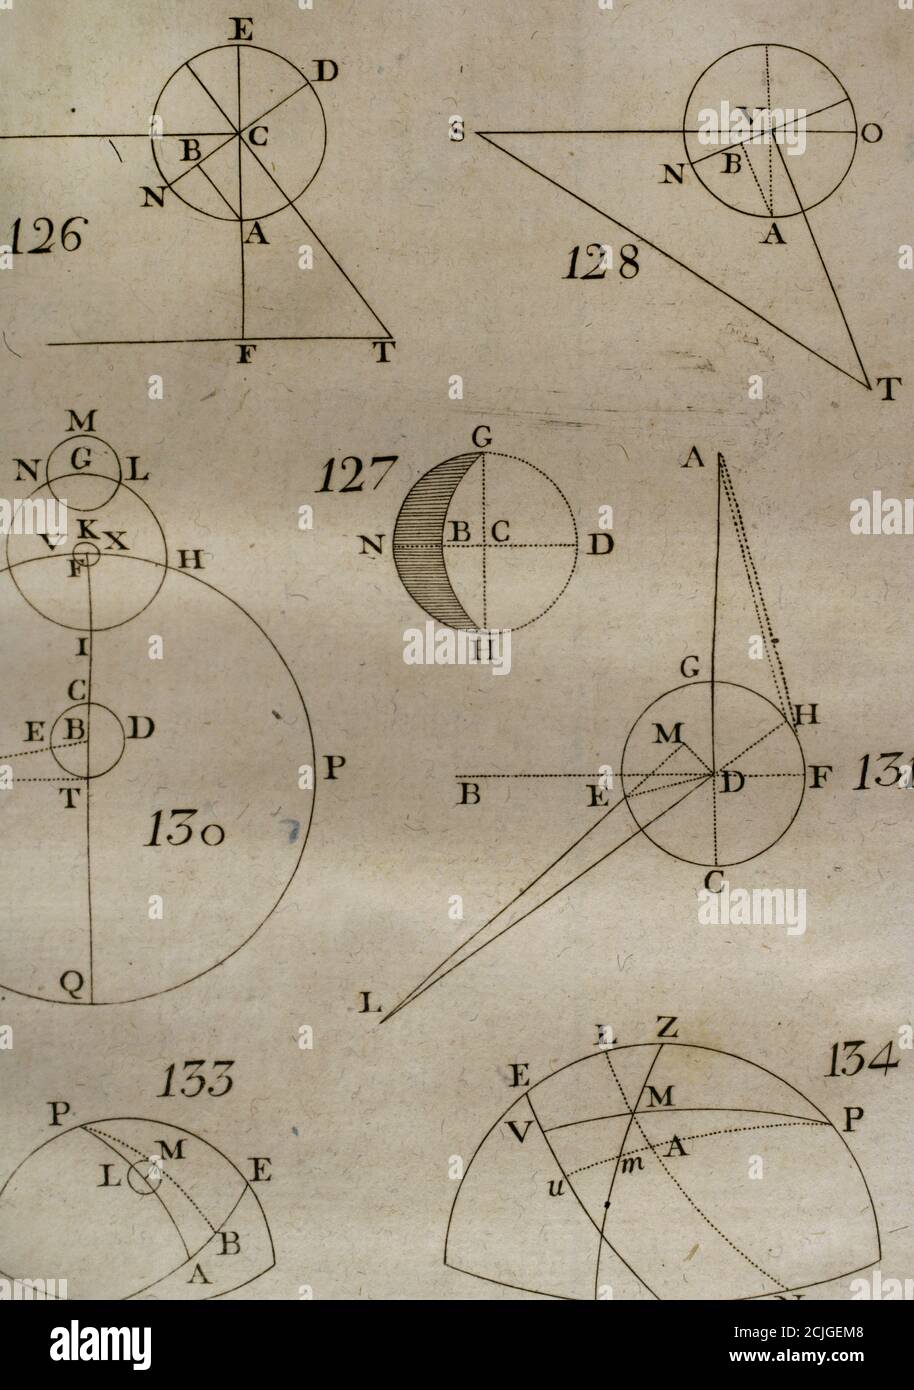 'Elementos de Matematica' (Elements of Mathematics), by the Spanish architect and mathematician of The Enlightenment Benito Bails (1730-1797). Astronomy calculations. Volume VII, which is about elements of astronomy. Published in Madrid, 1775. Stock Photo